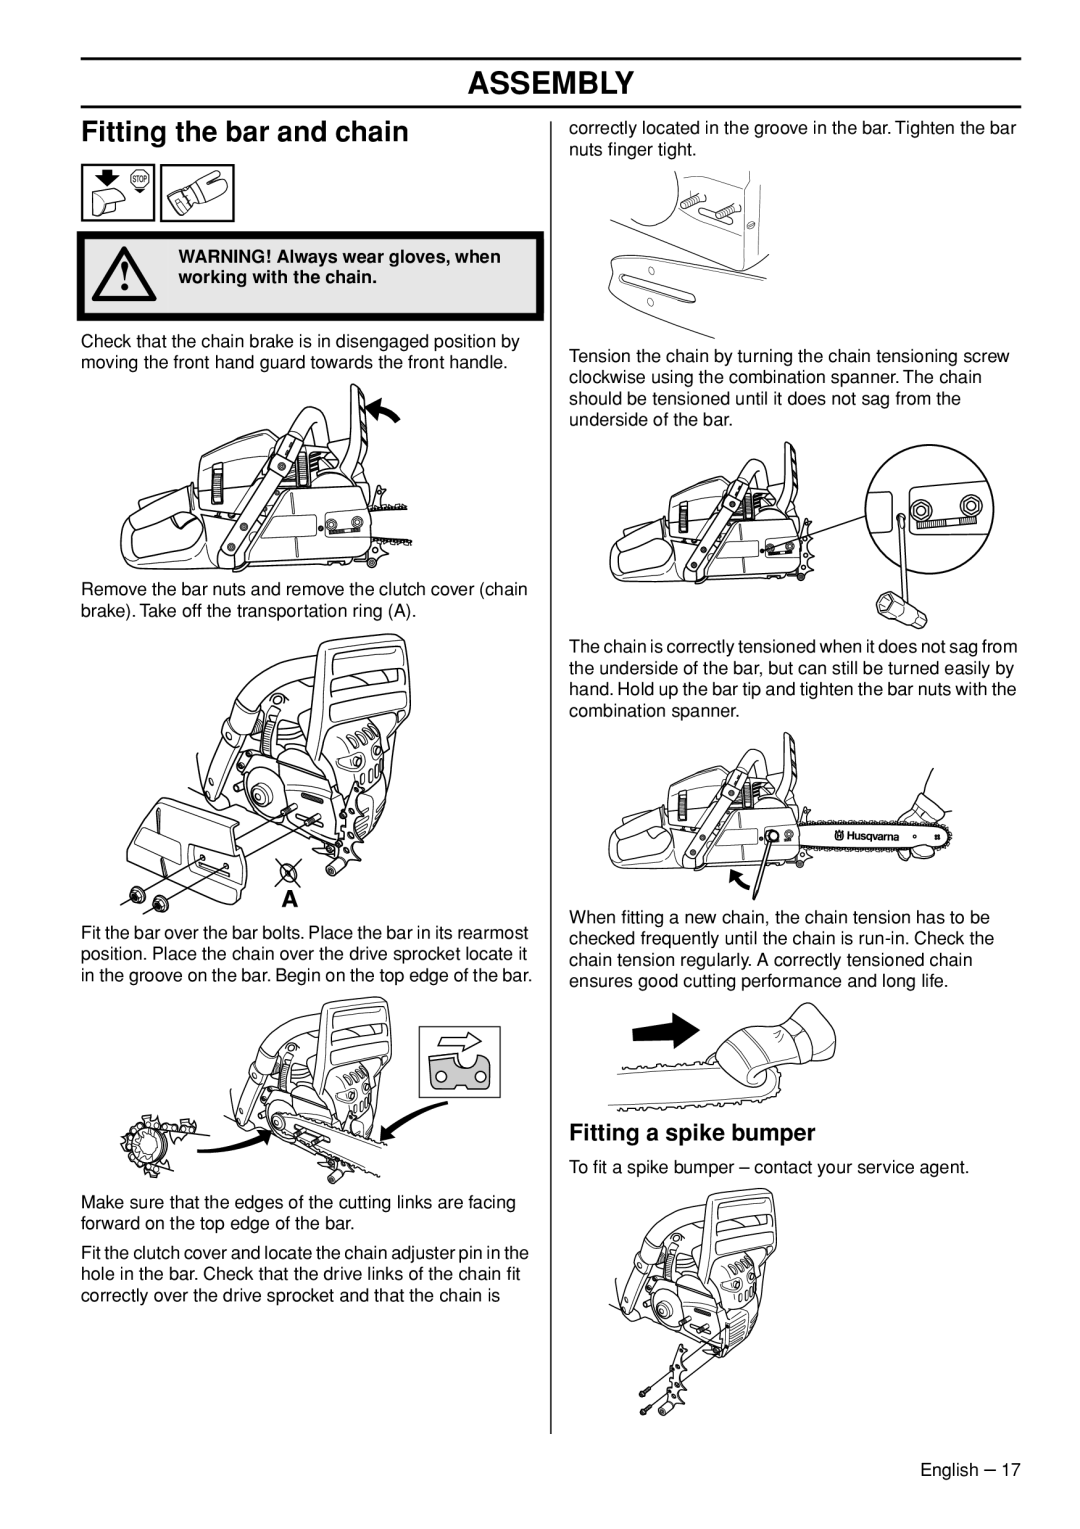 Husqvarna 1153181-26 manual Assembly, Fitting the bar and chain, Fitting a spike bumper, WARNING! Always wear gloves, when 